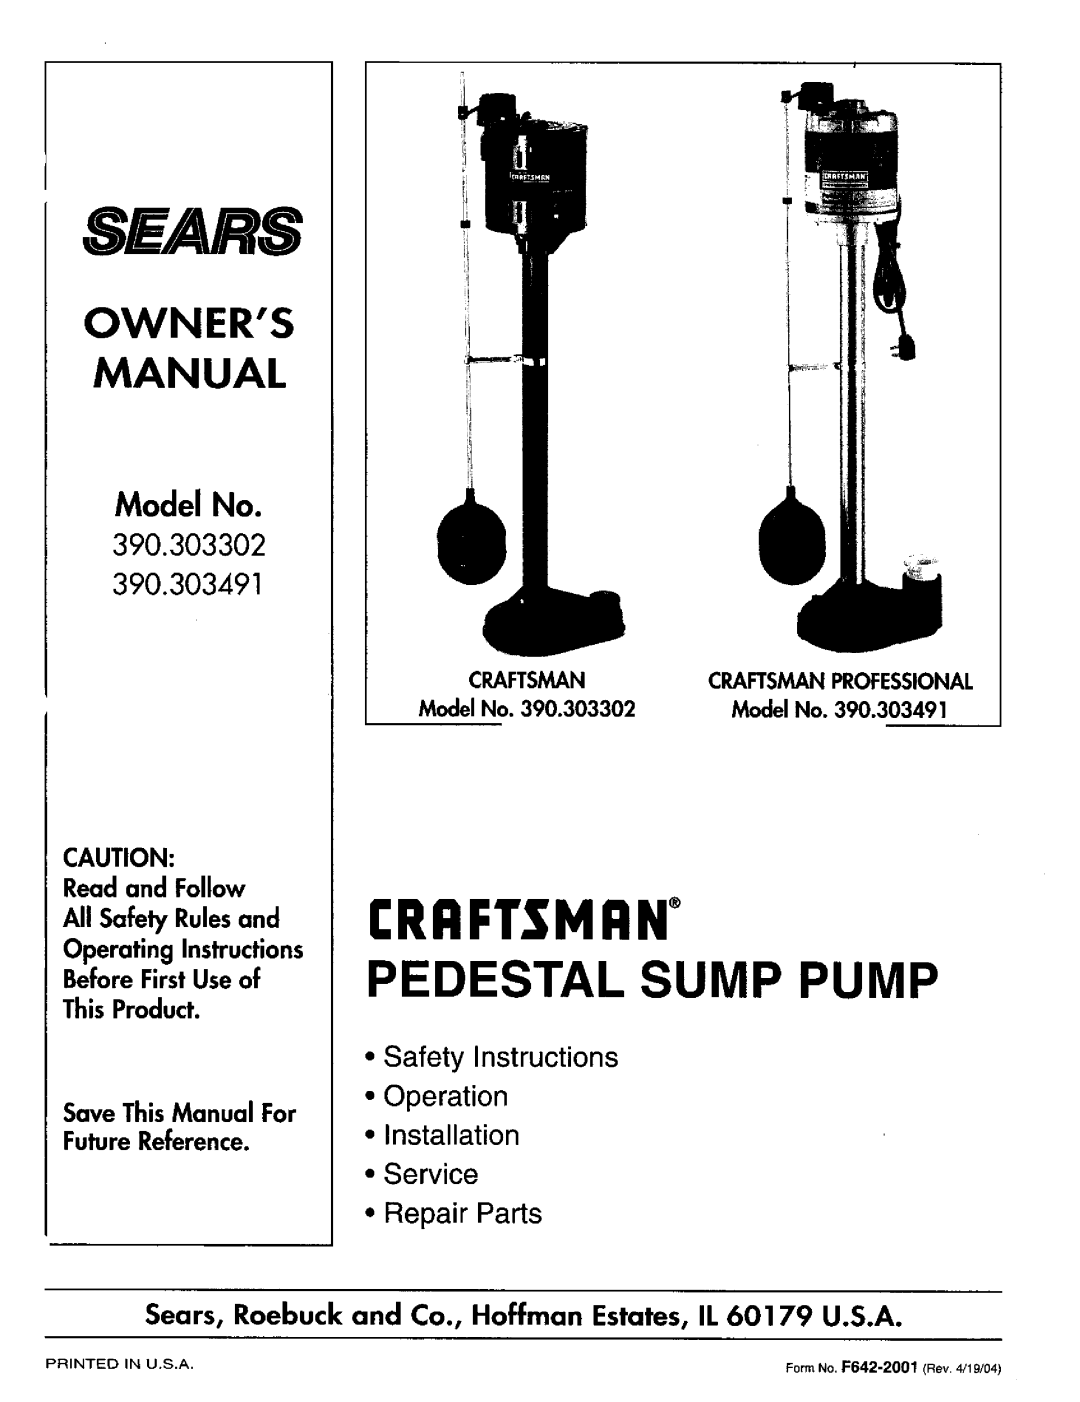 Sears 390.303302 owner manual Pedestal Sump Pump, Owners Manual, Safety Instructions, Before FirstUse of This Product 